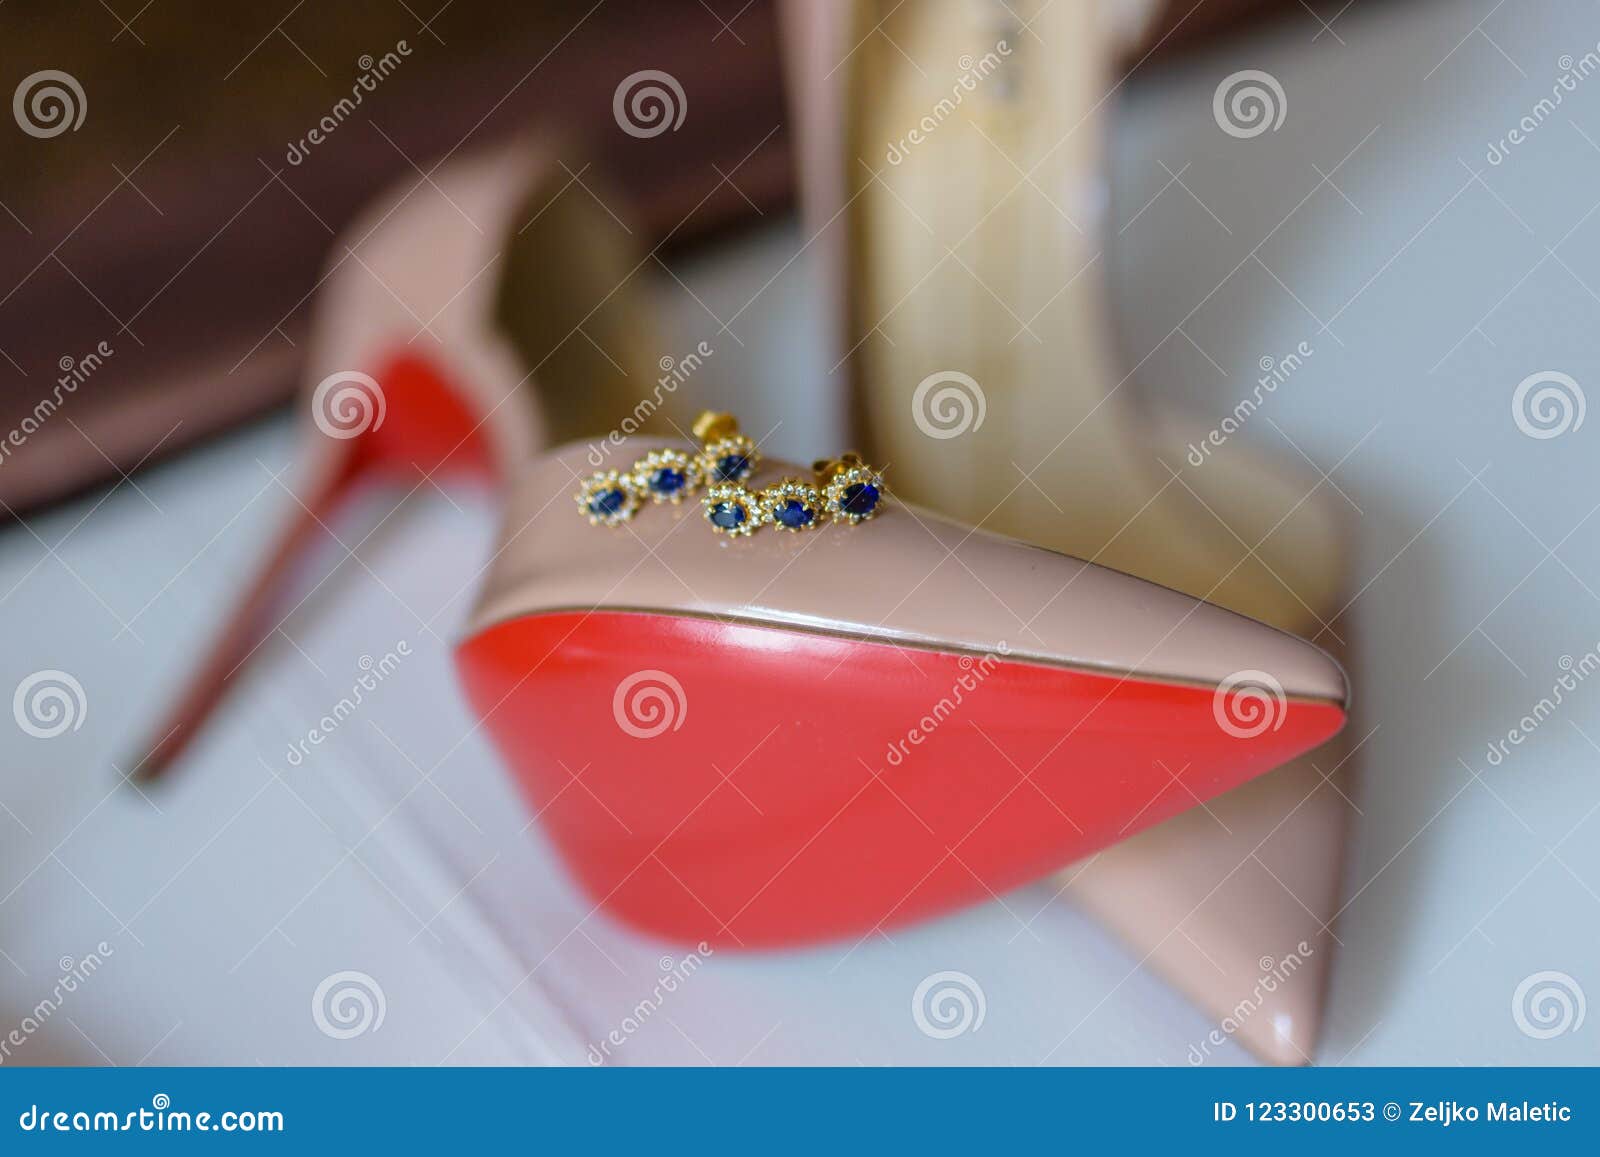 White Shoes With A Red Sole On The Foot Of The Bed, Close-up Stock Photo,  Picture and Royalty Free Image. Image 126064281.